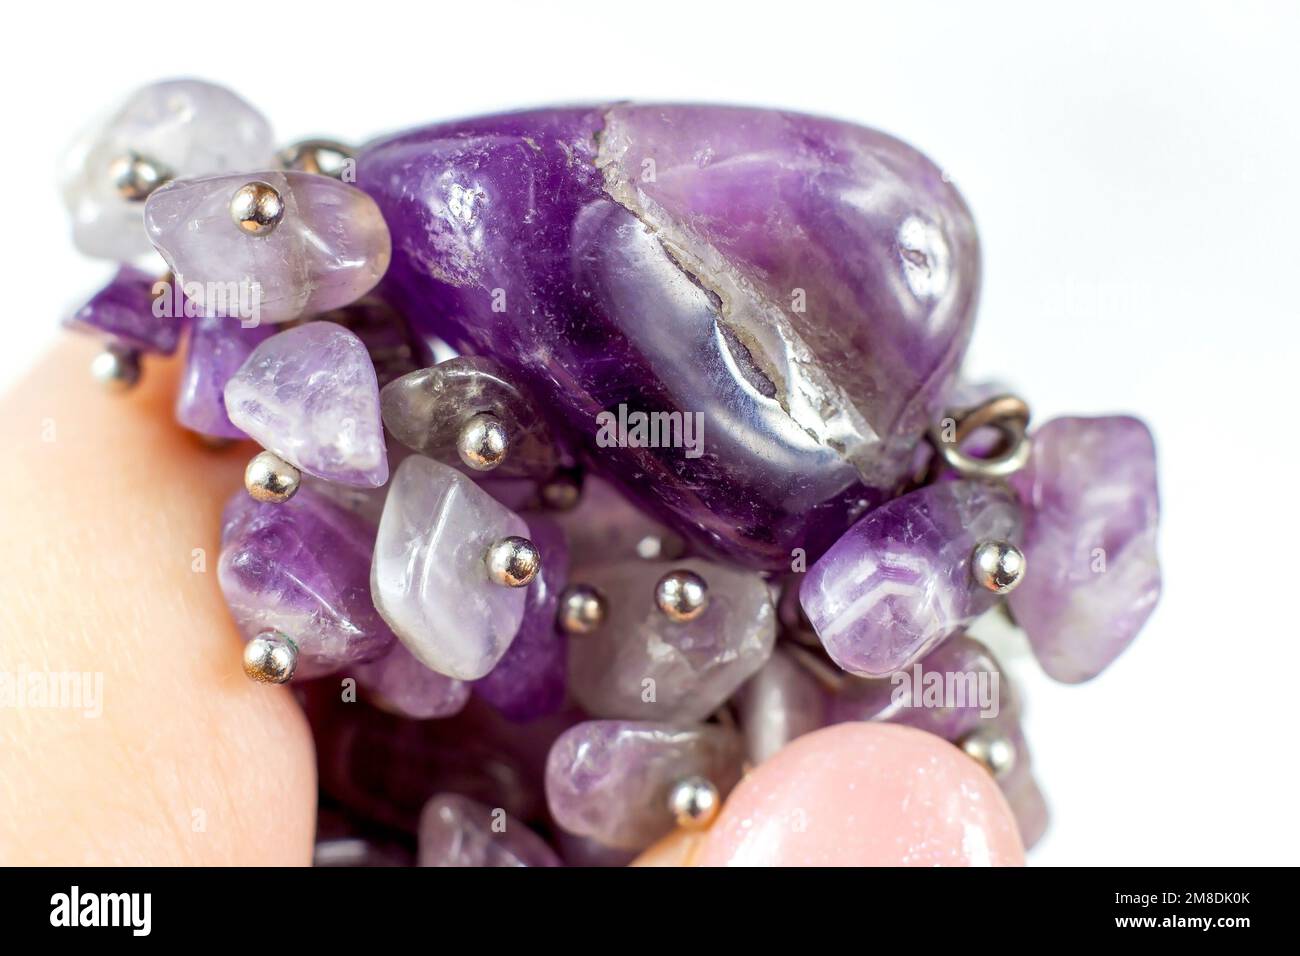 Bright transparent violet amethyst crystal gems in the hand on light background close up. Stock Photo